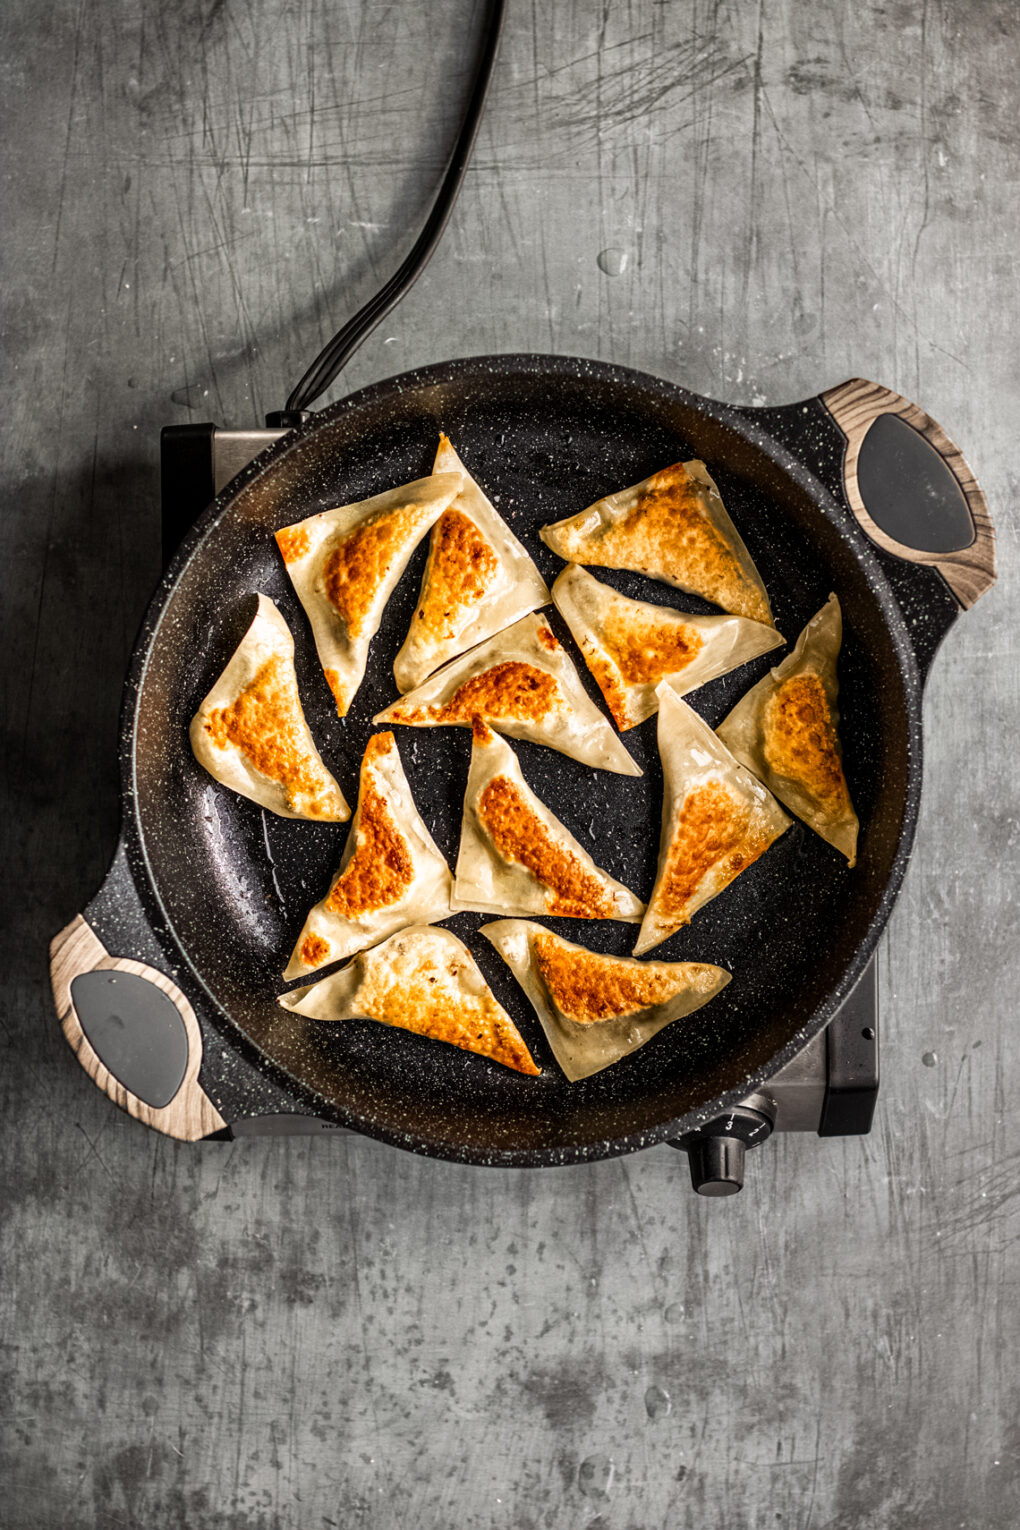 elk pot stickers cooking in a skillet